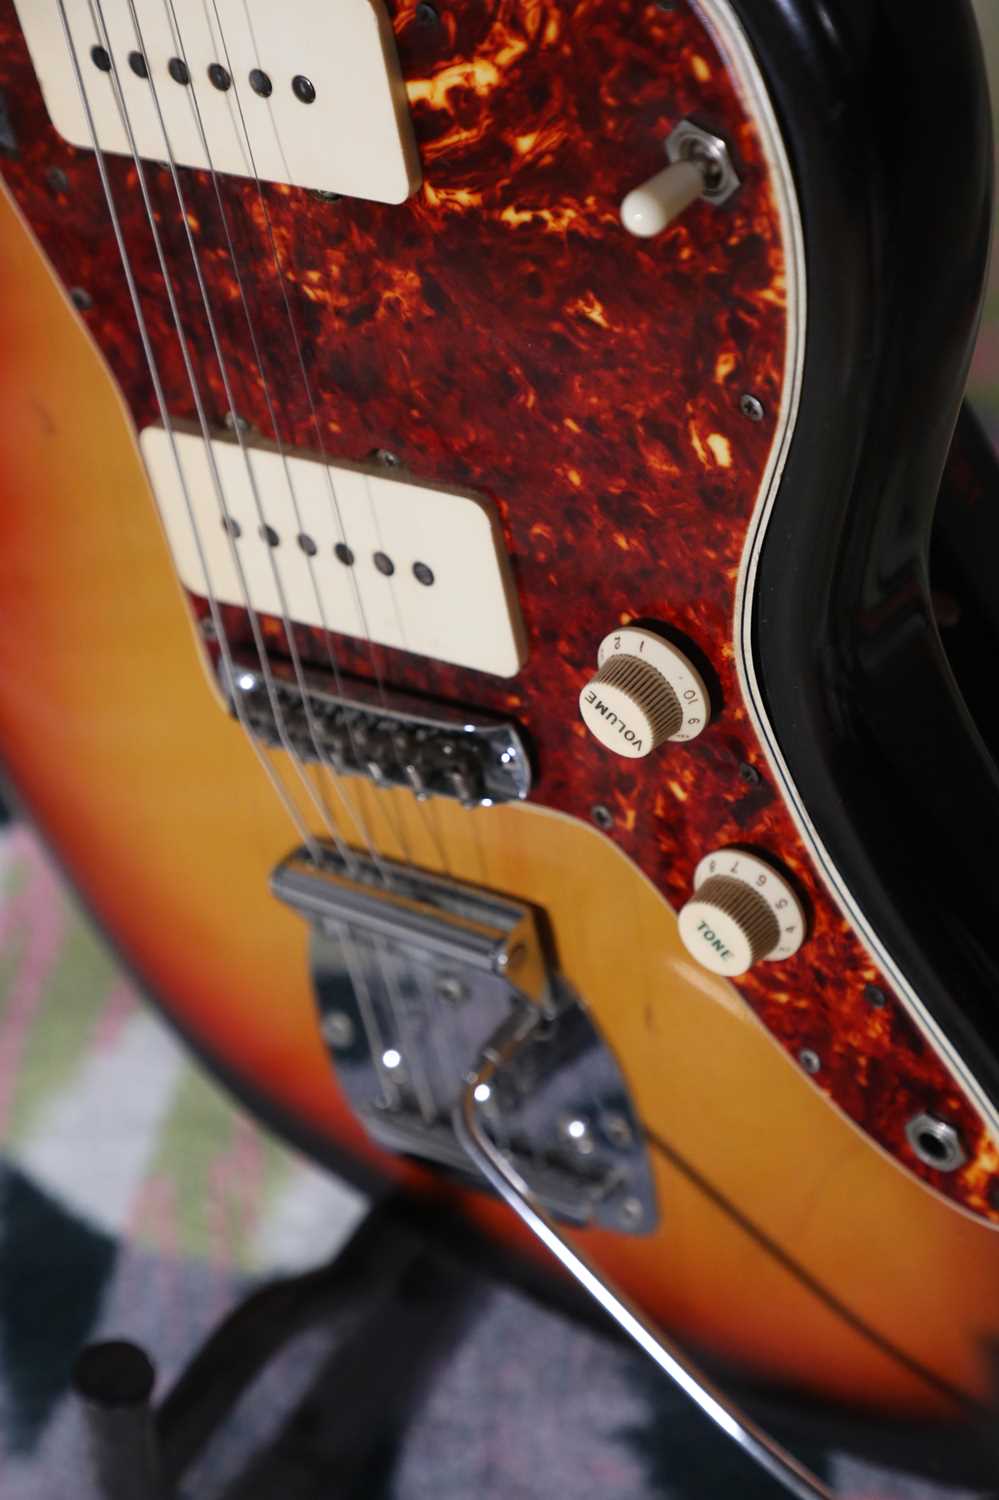 A 1965 Fender Jazzmaster electric guitar, - Image 3 of 16